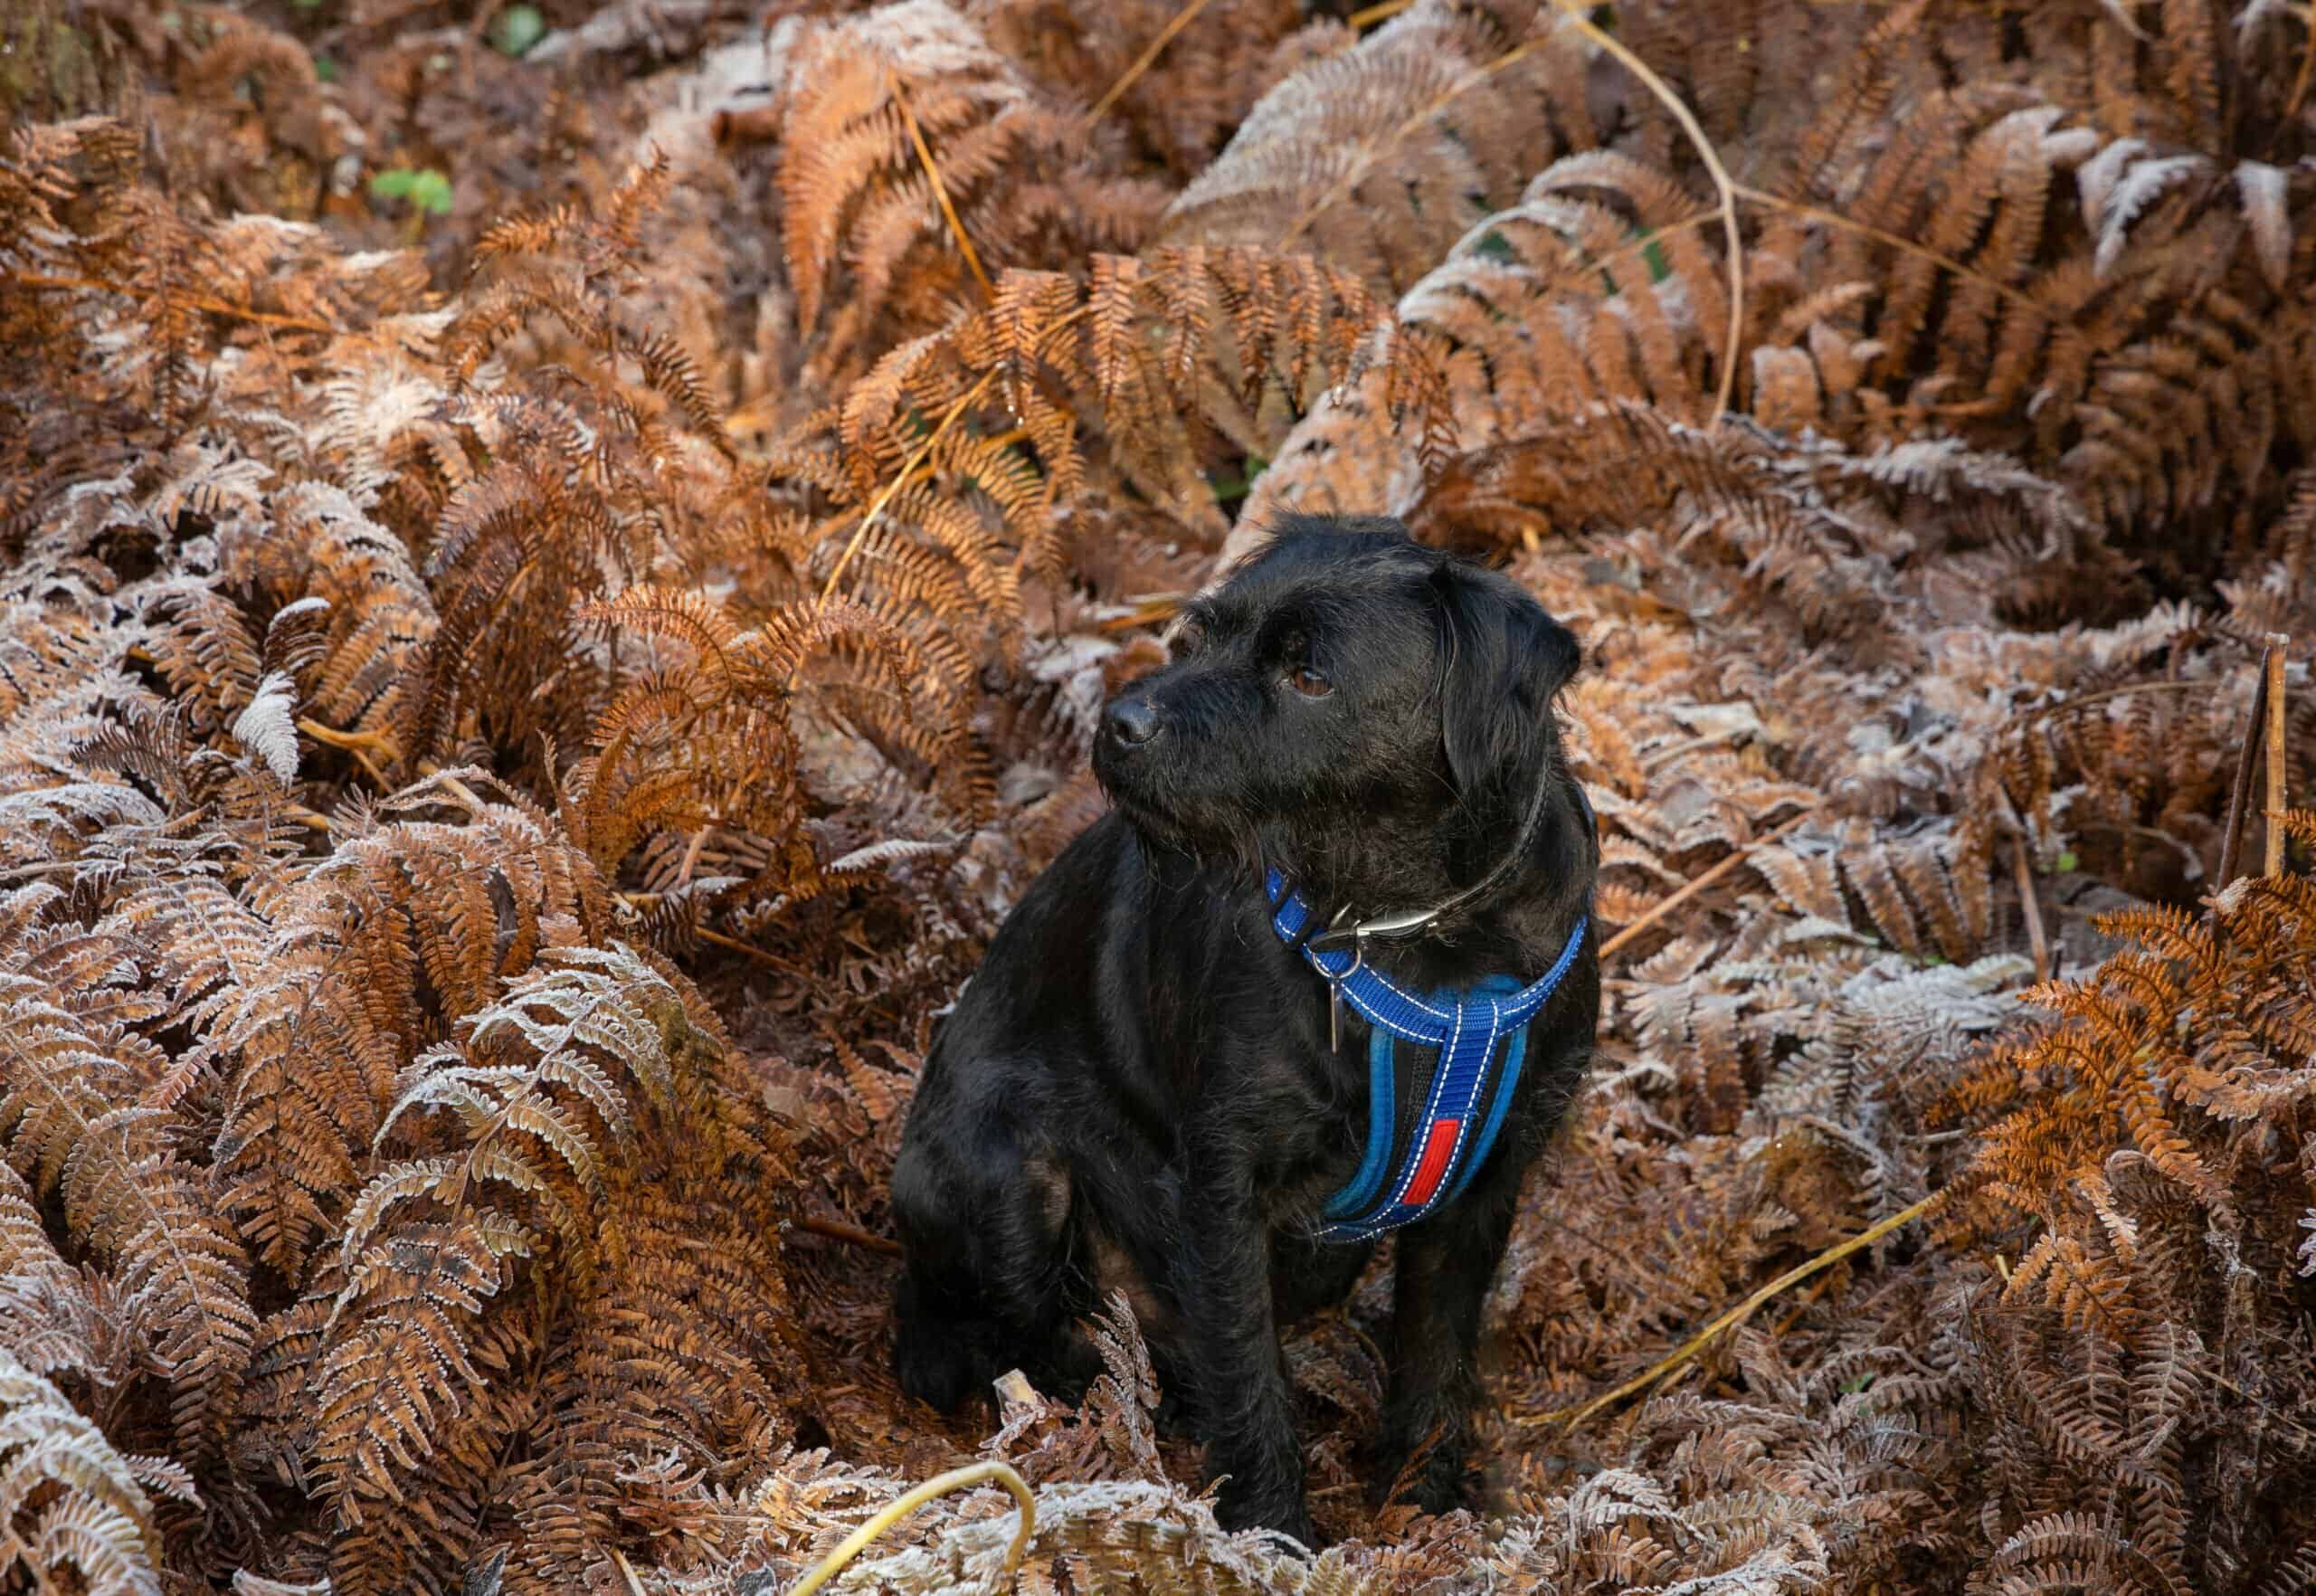 Do Patterdale Terriers Naturally Bark a Lot?